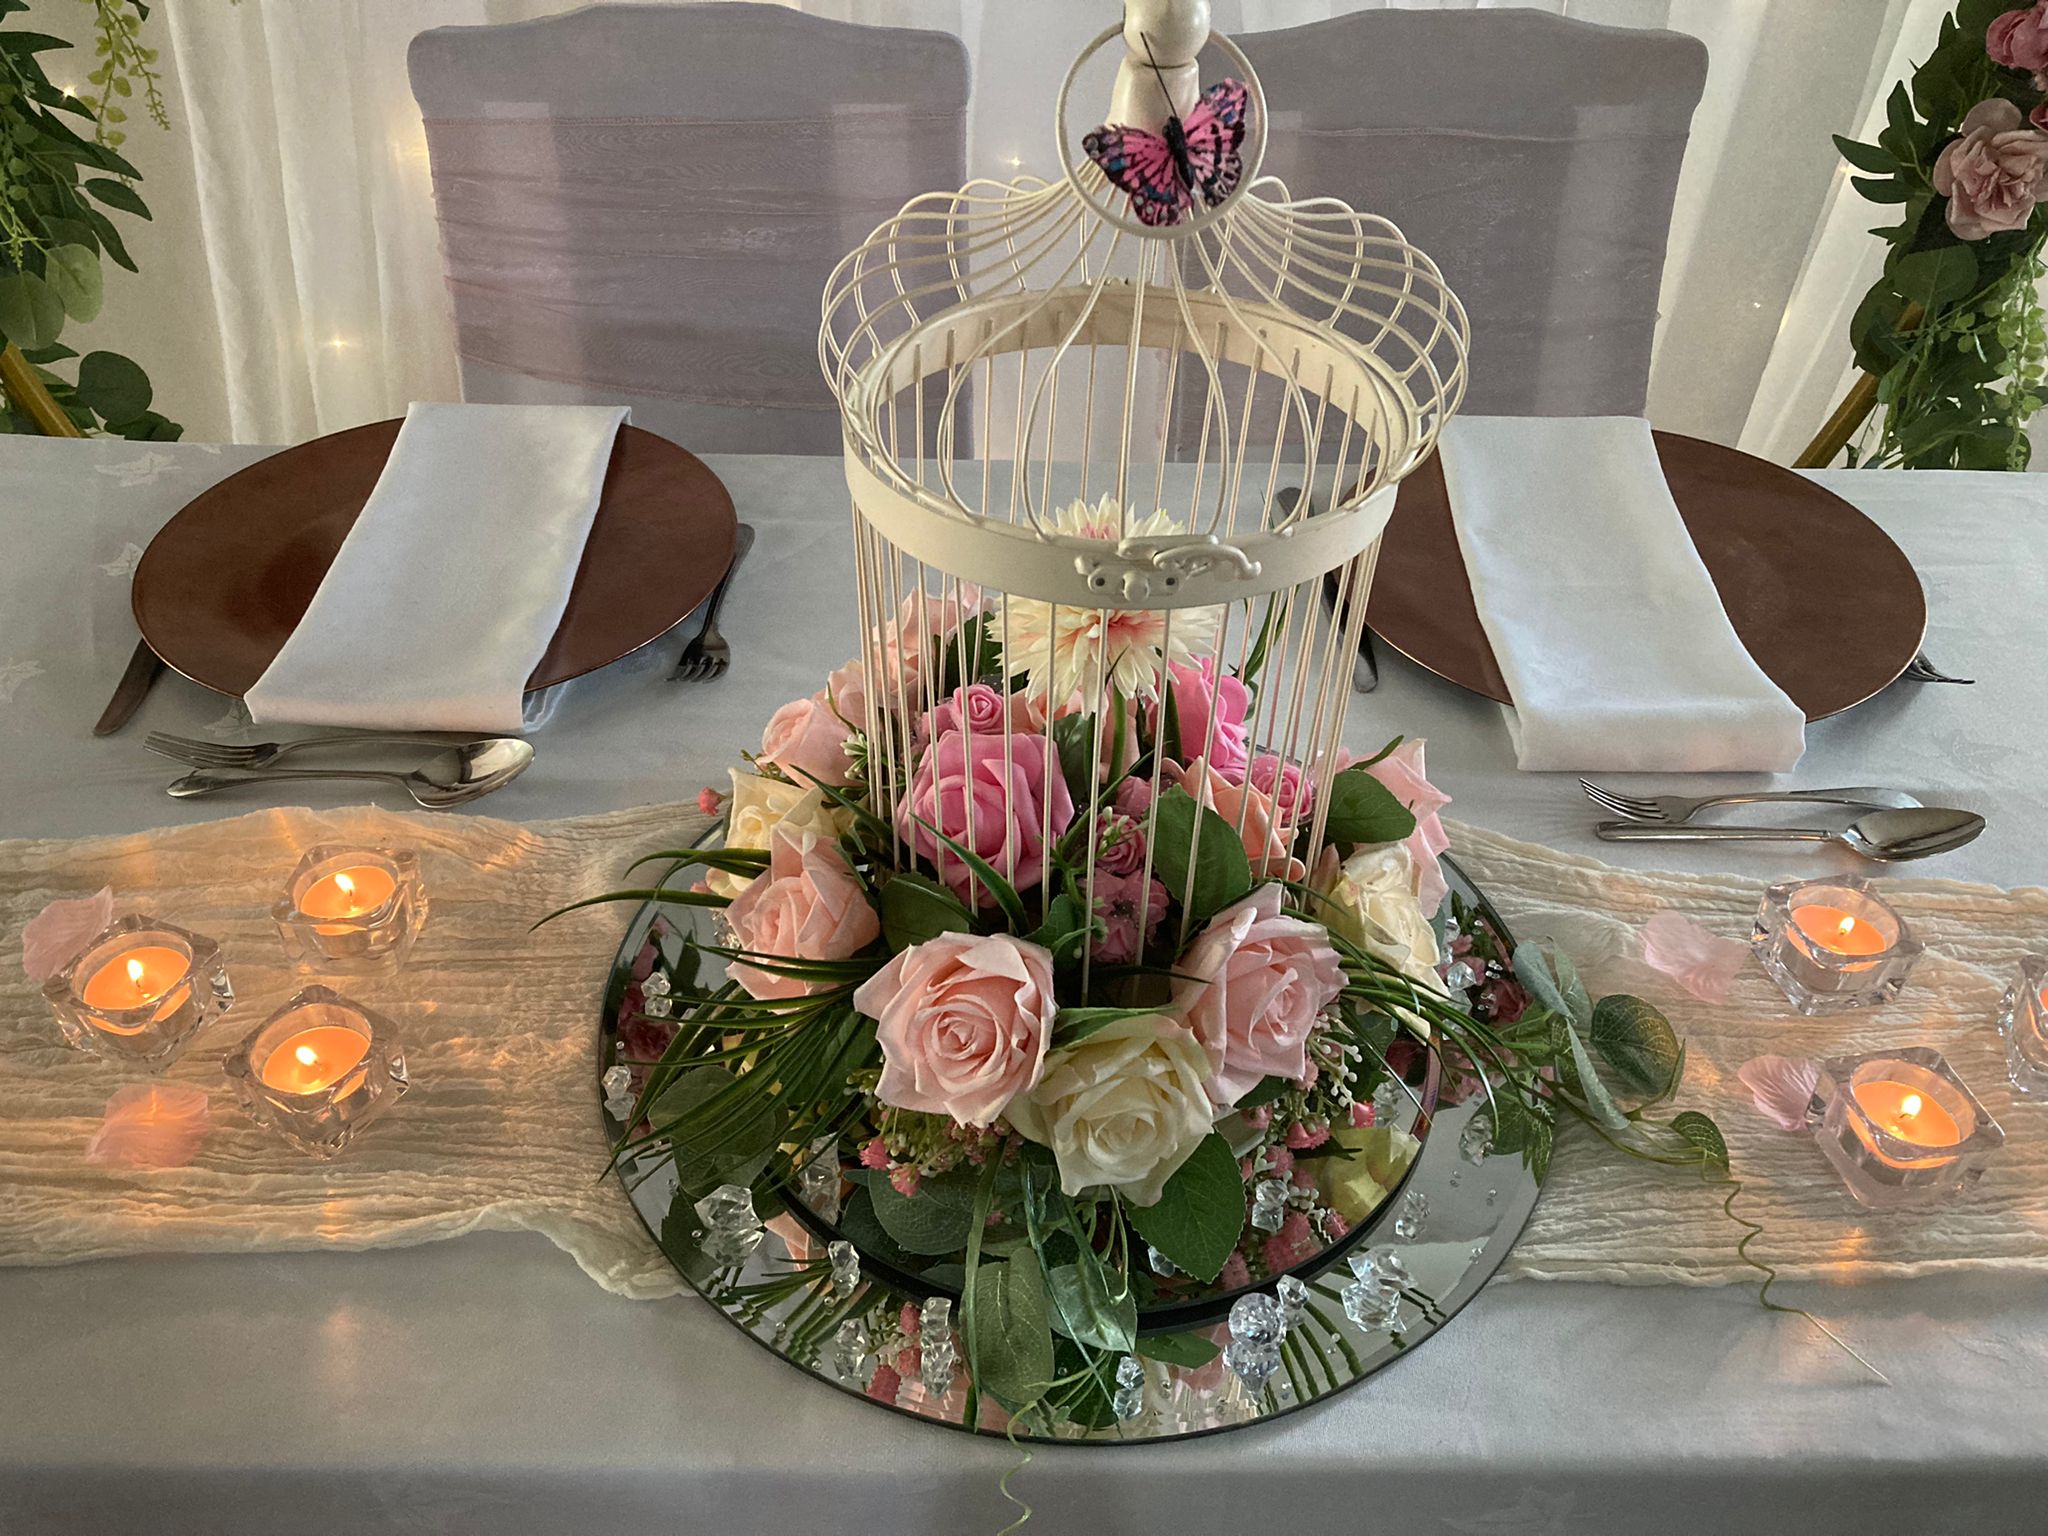 Bird cage centrepiece with pink floral garland on a mirror plate